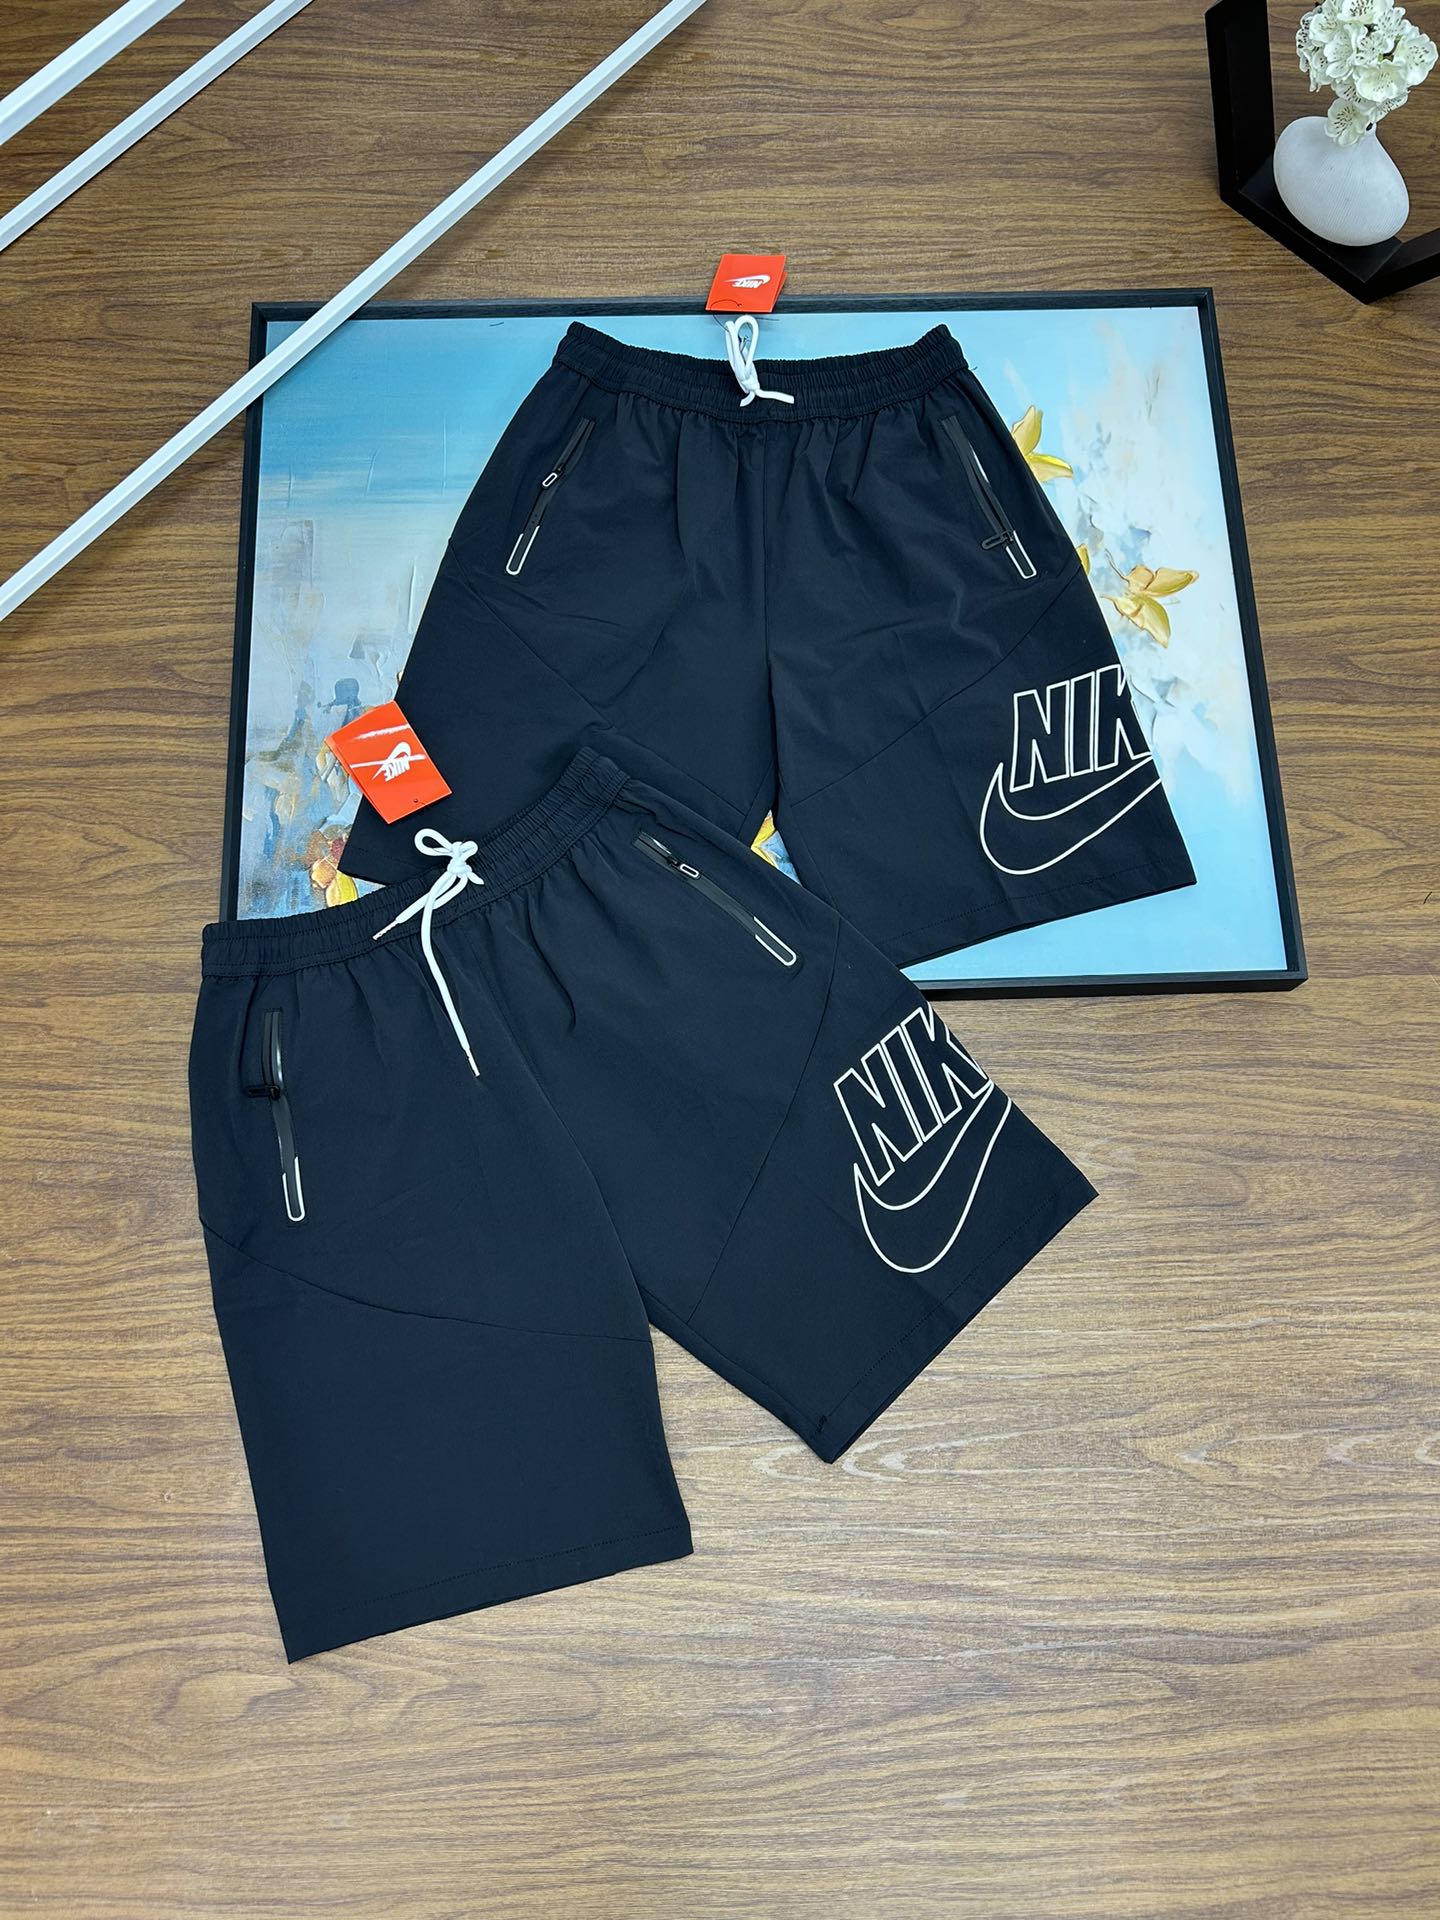 Shop Cheap High Quality 1:1 Replica
 Nike Clothing Shorts Black White Men Summer Collection Casual